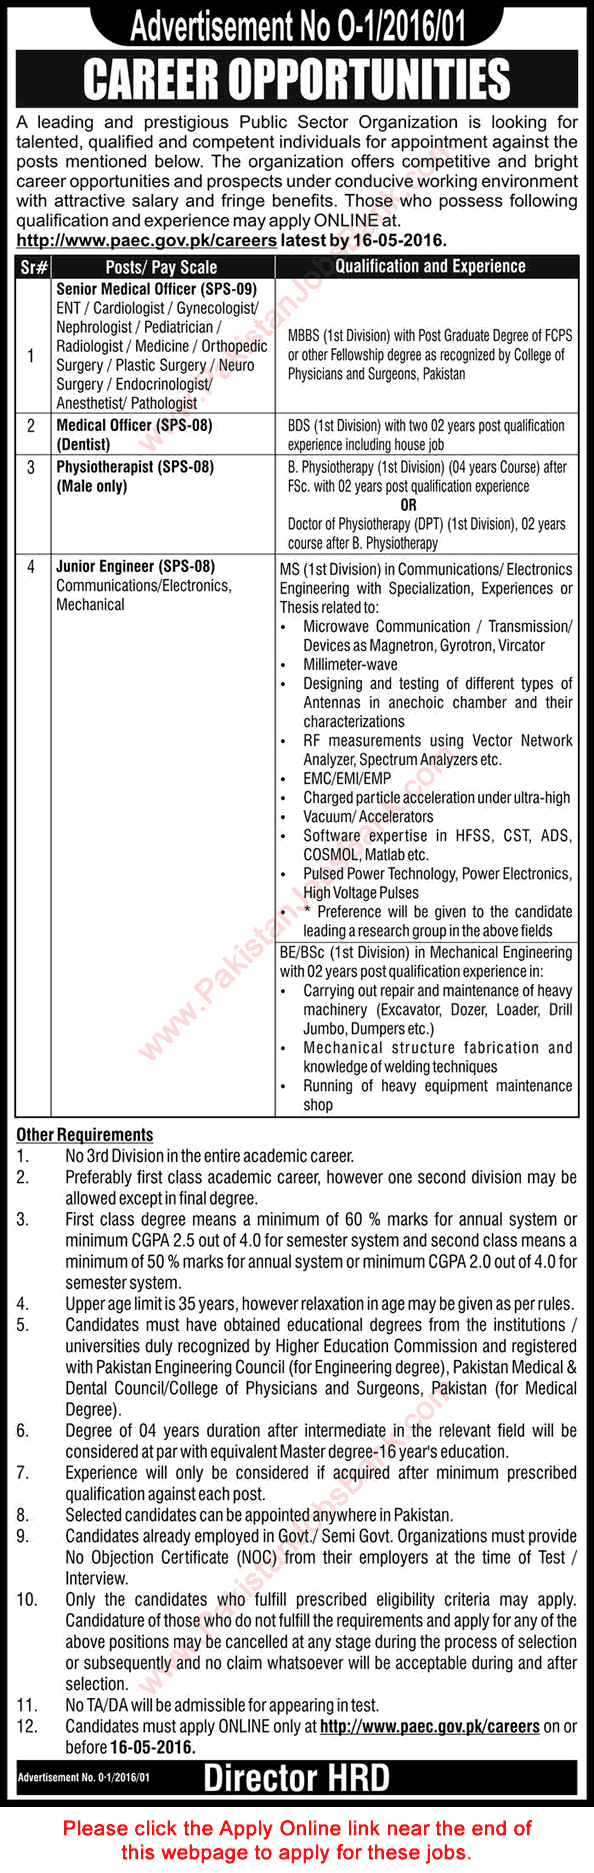 Pakistan Atomic Energy Commission Jobs May 2016 PAEC Senior / Medical Officers & Others Apply Online Latest